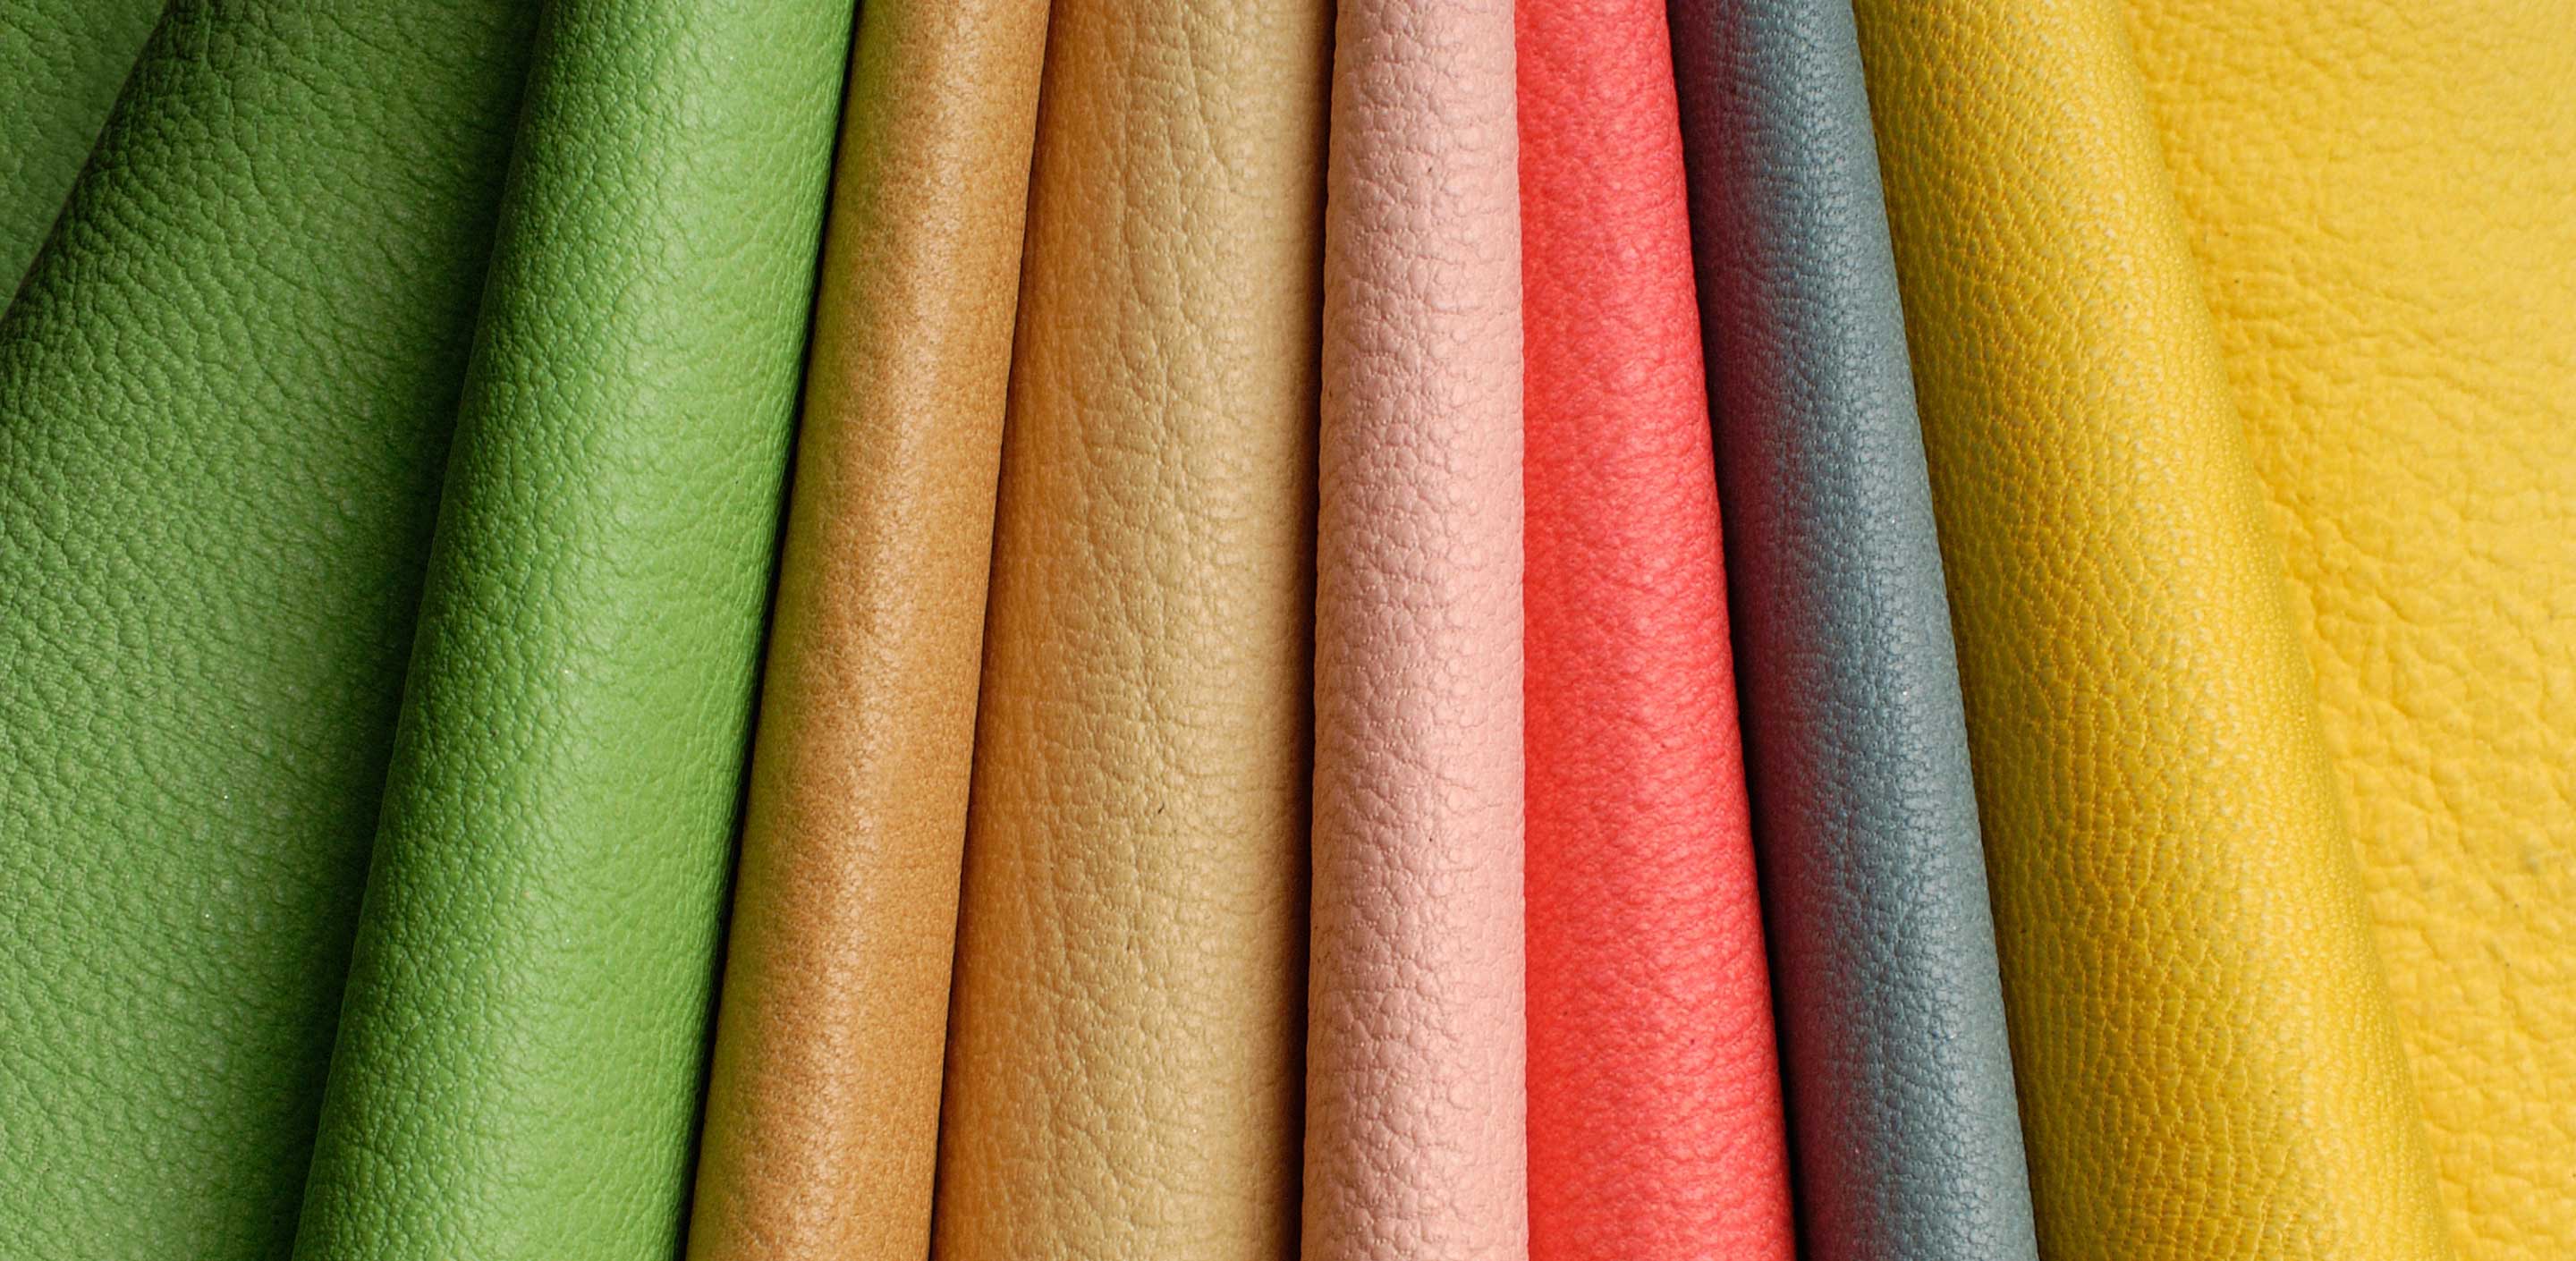 What Is The Difference Between Leather And Rexine?